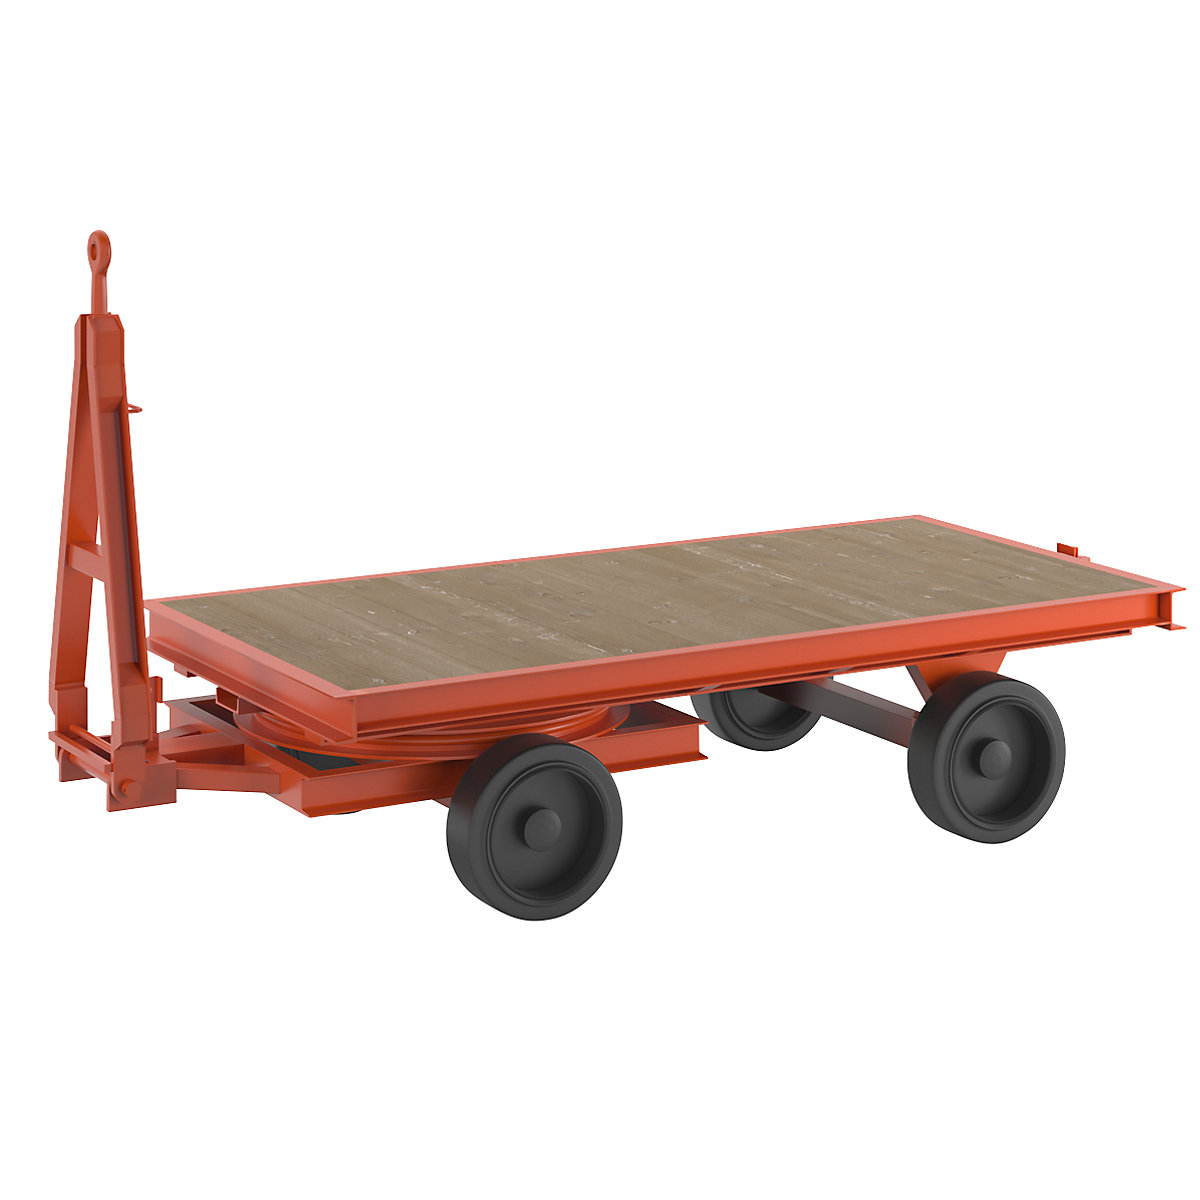 Trailer, 4-wheel double turntable steering, max. load 8 t, platform 2.5 x 1.25 m, solid rubber tyres-1